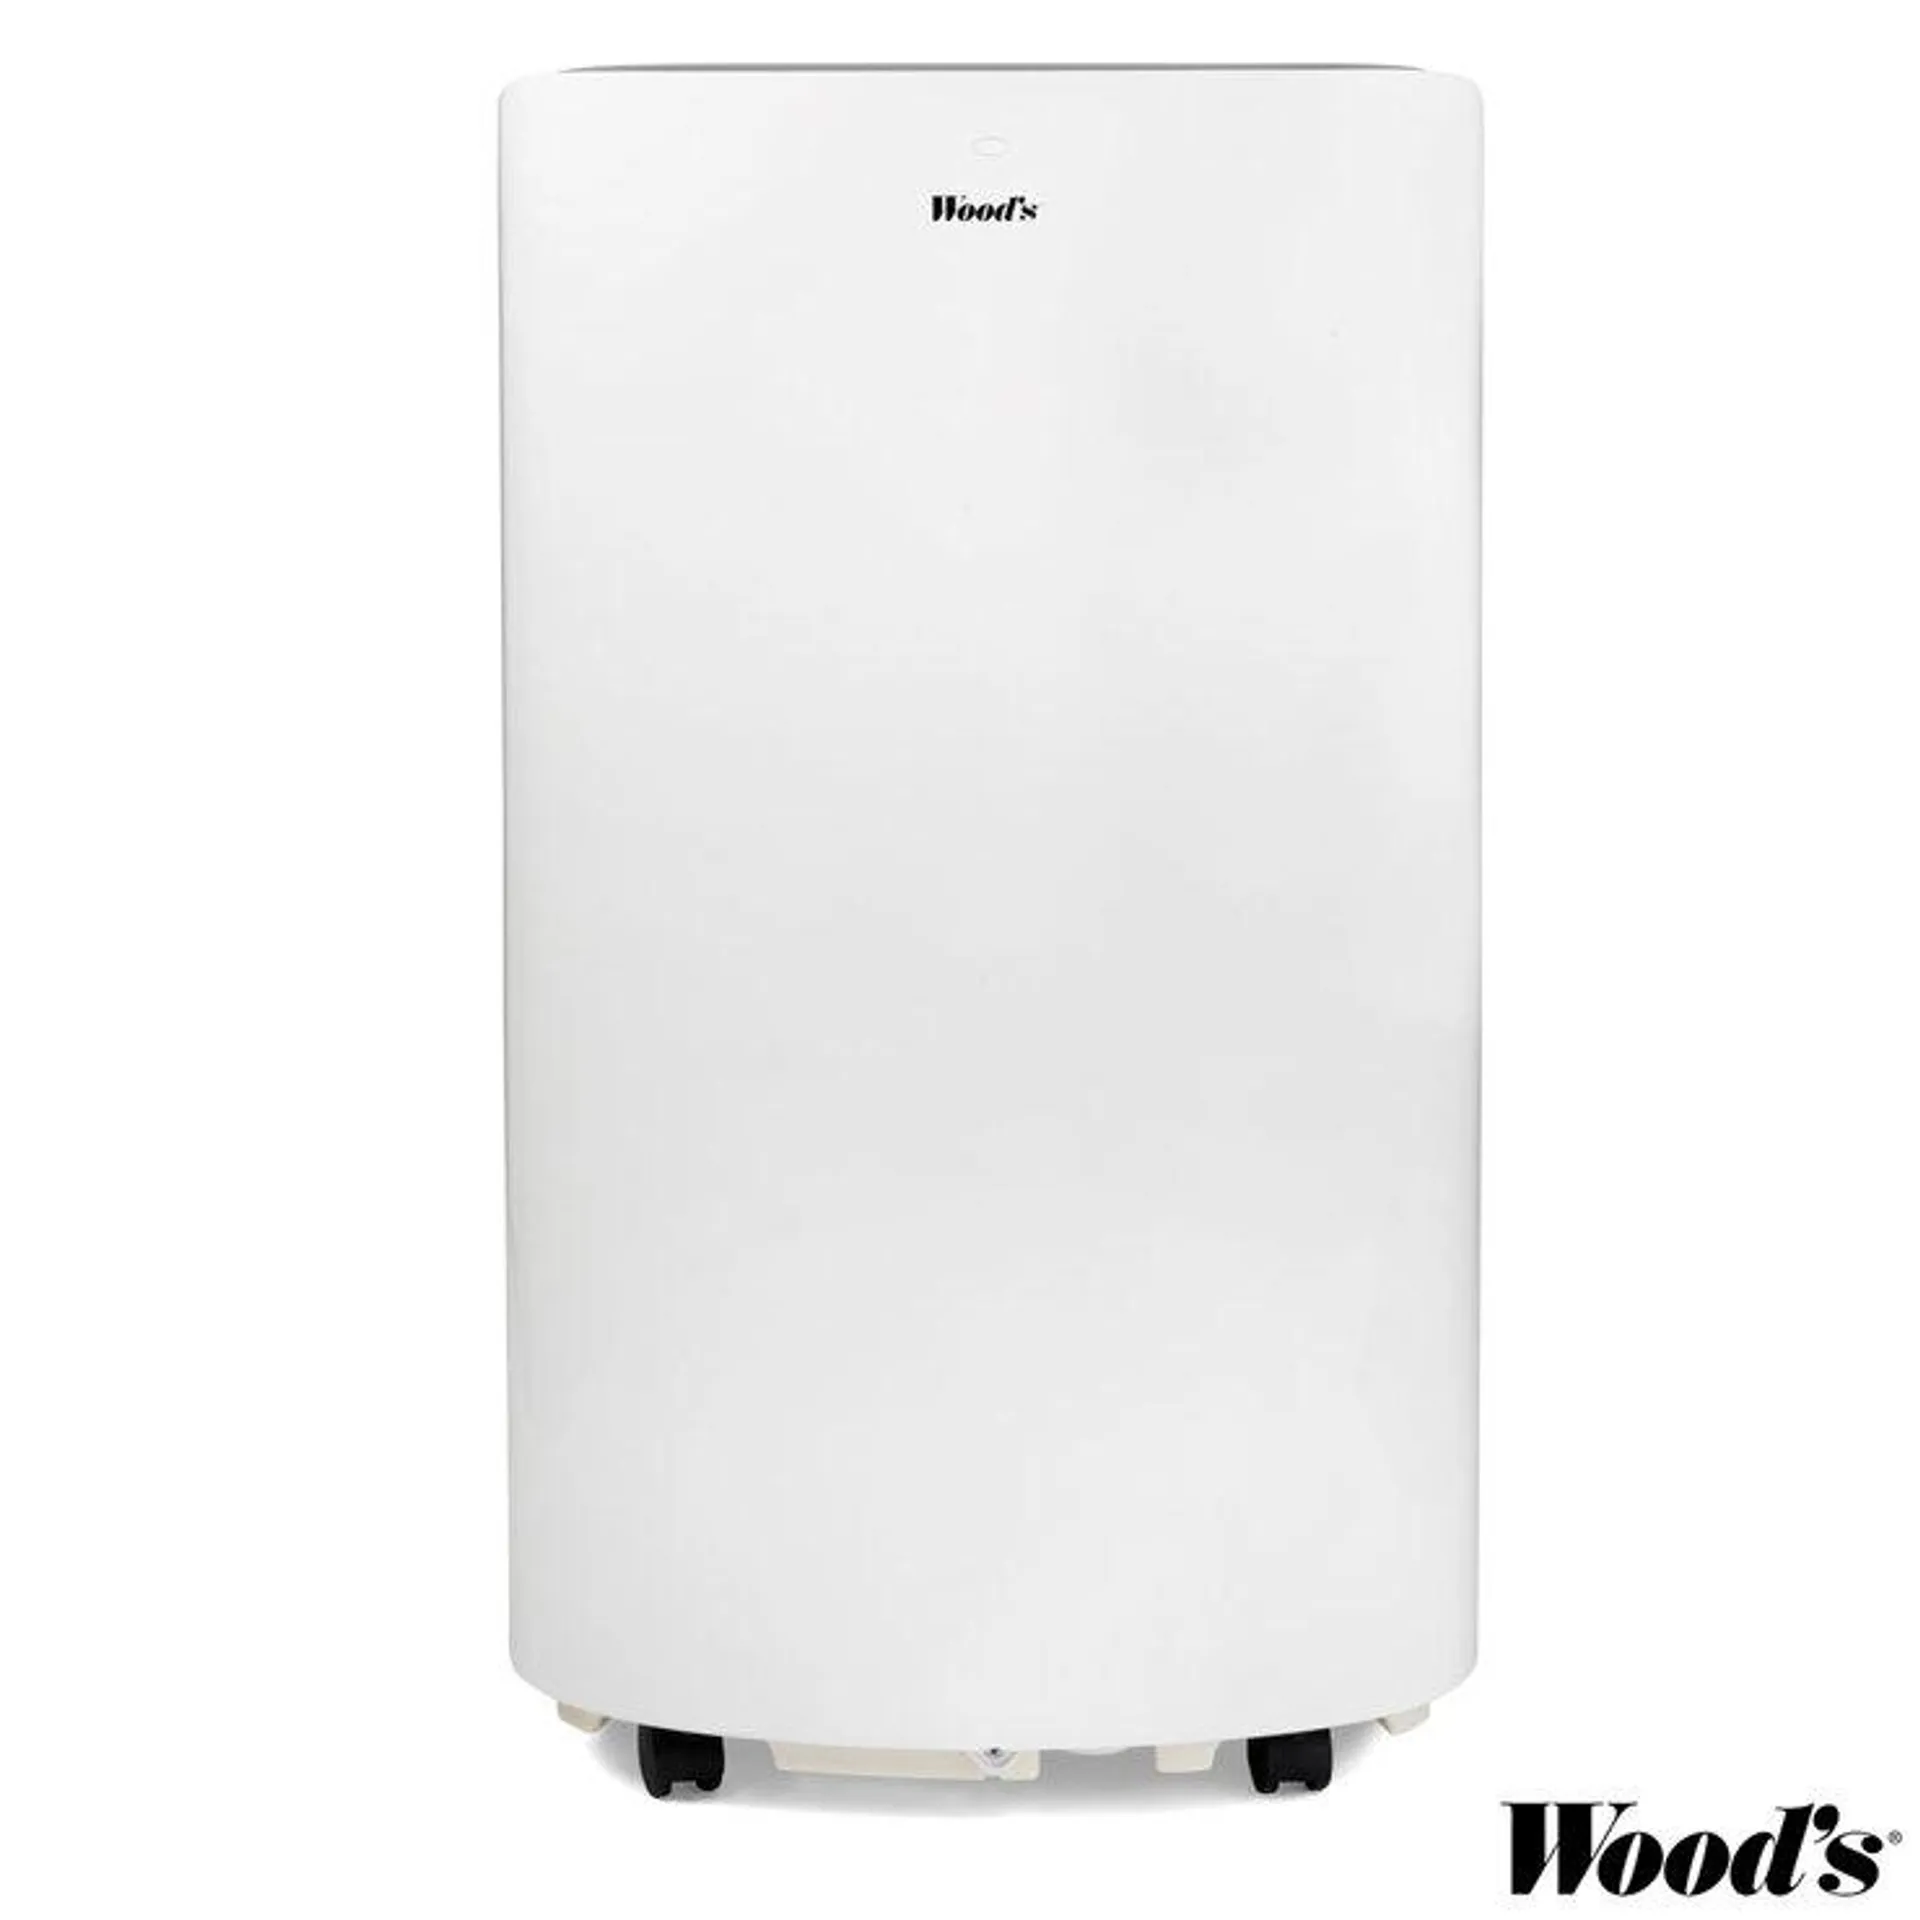 Wood's Cortina Silent 12K BTU Portable Air Conditioner with Remote Control, WAC1202G